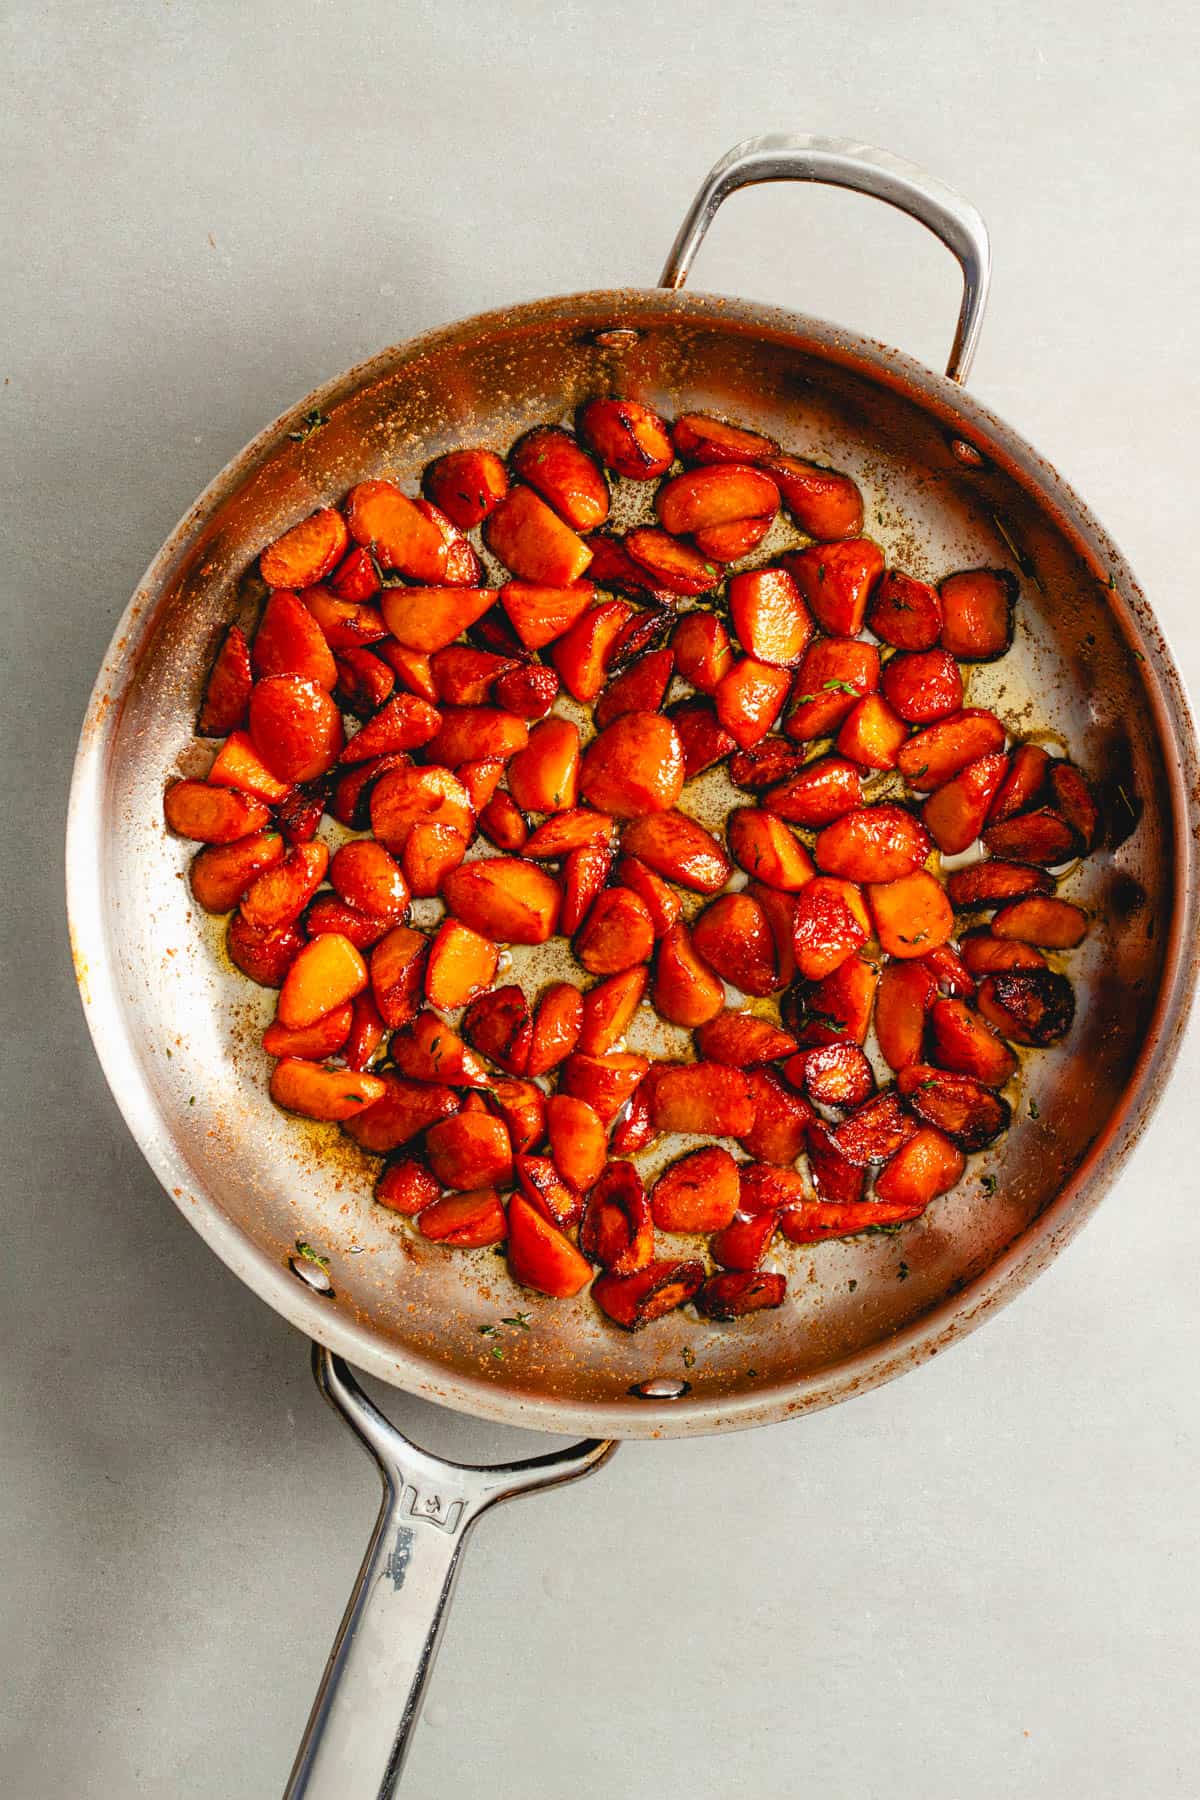 Sauteed spiced carrots in a large skillet.